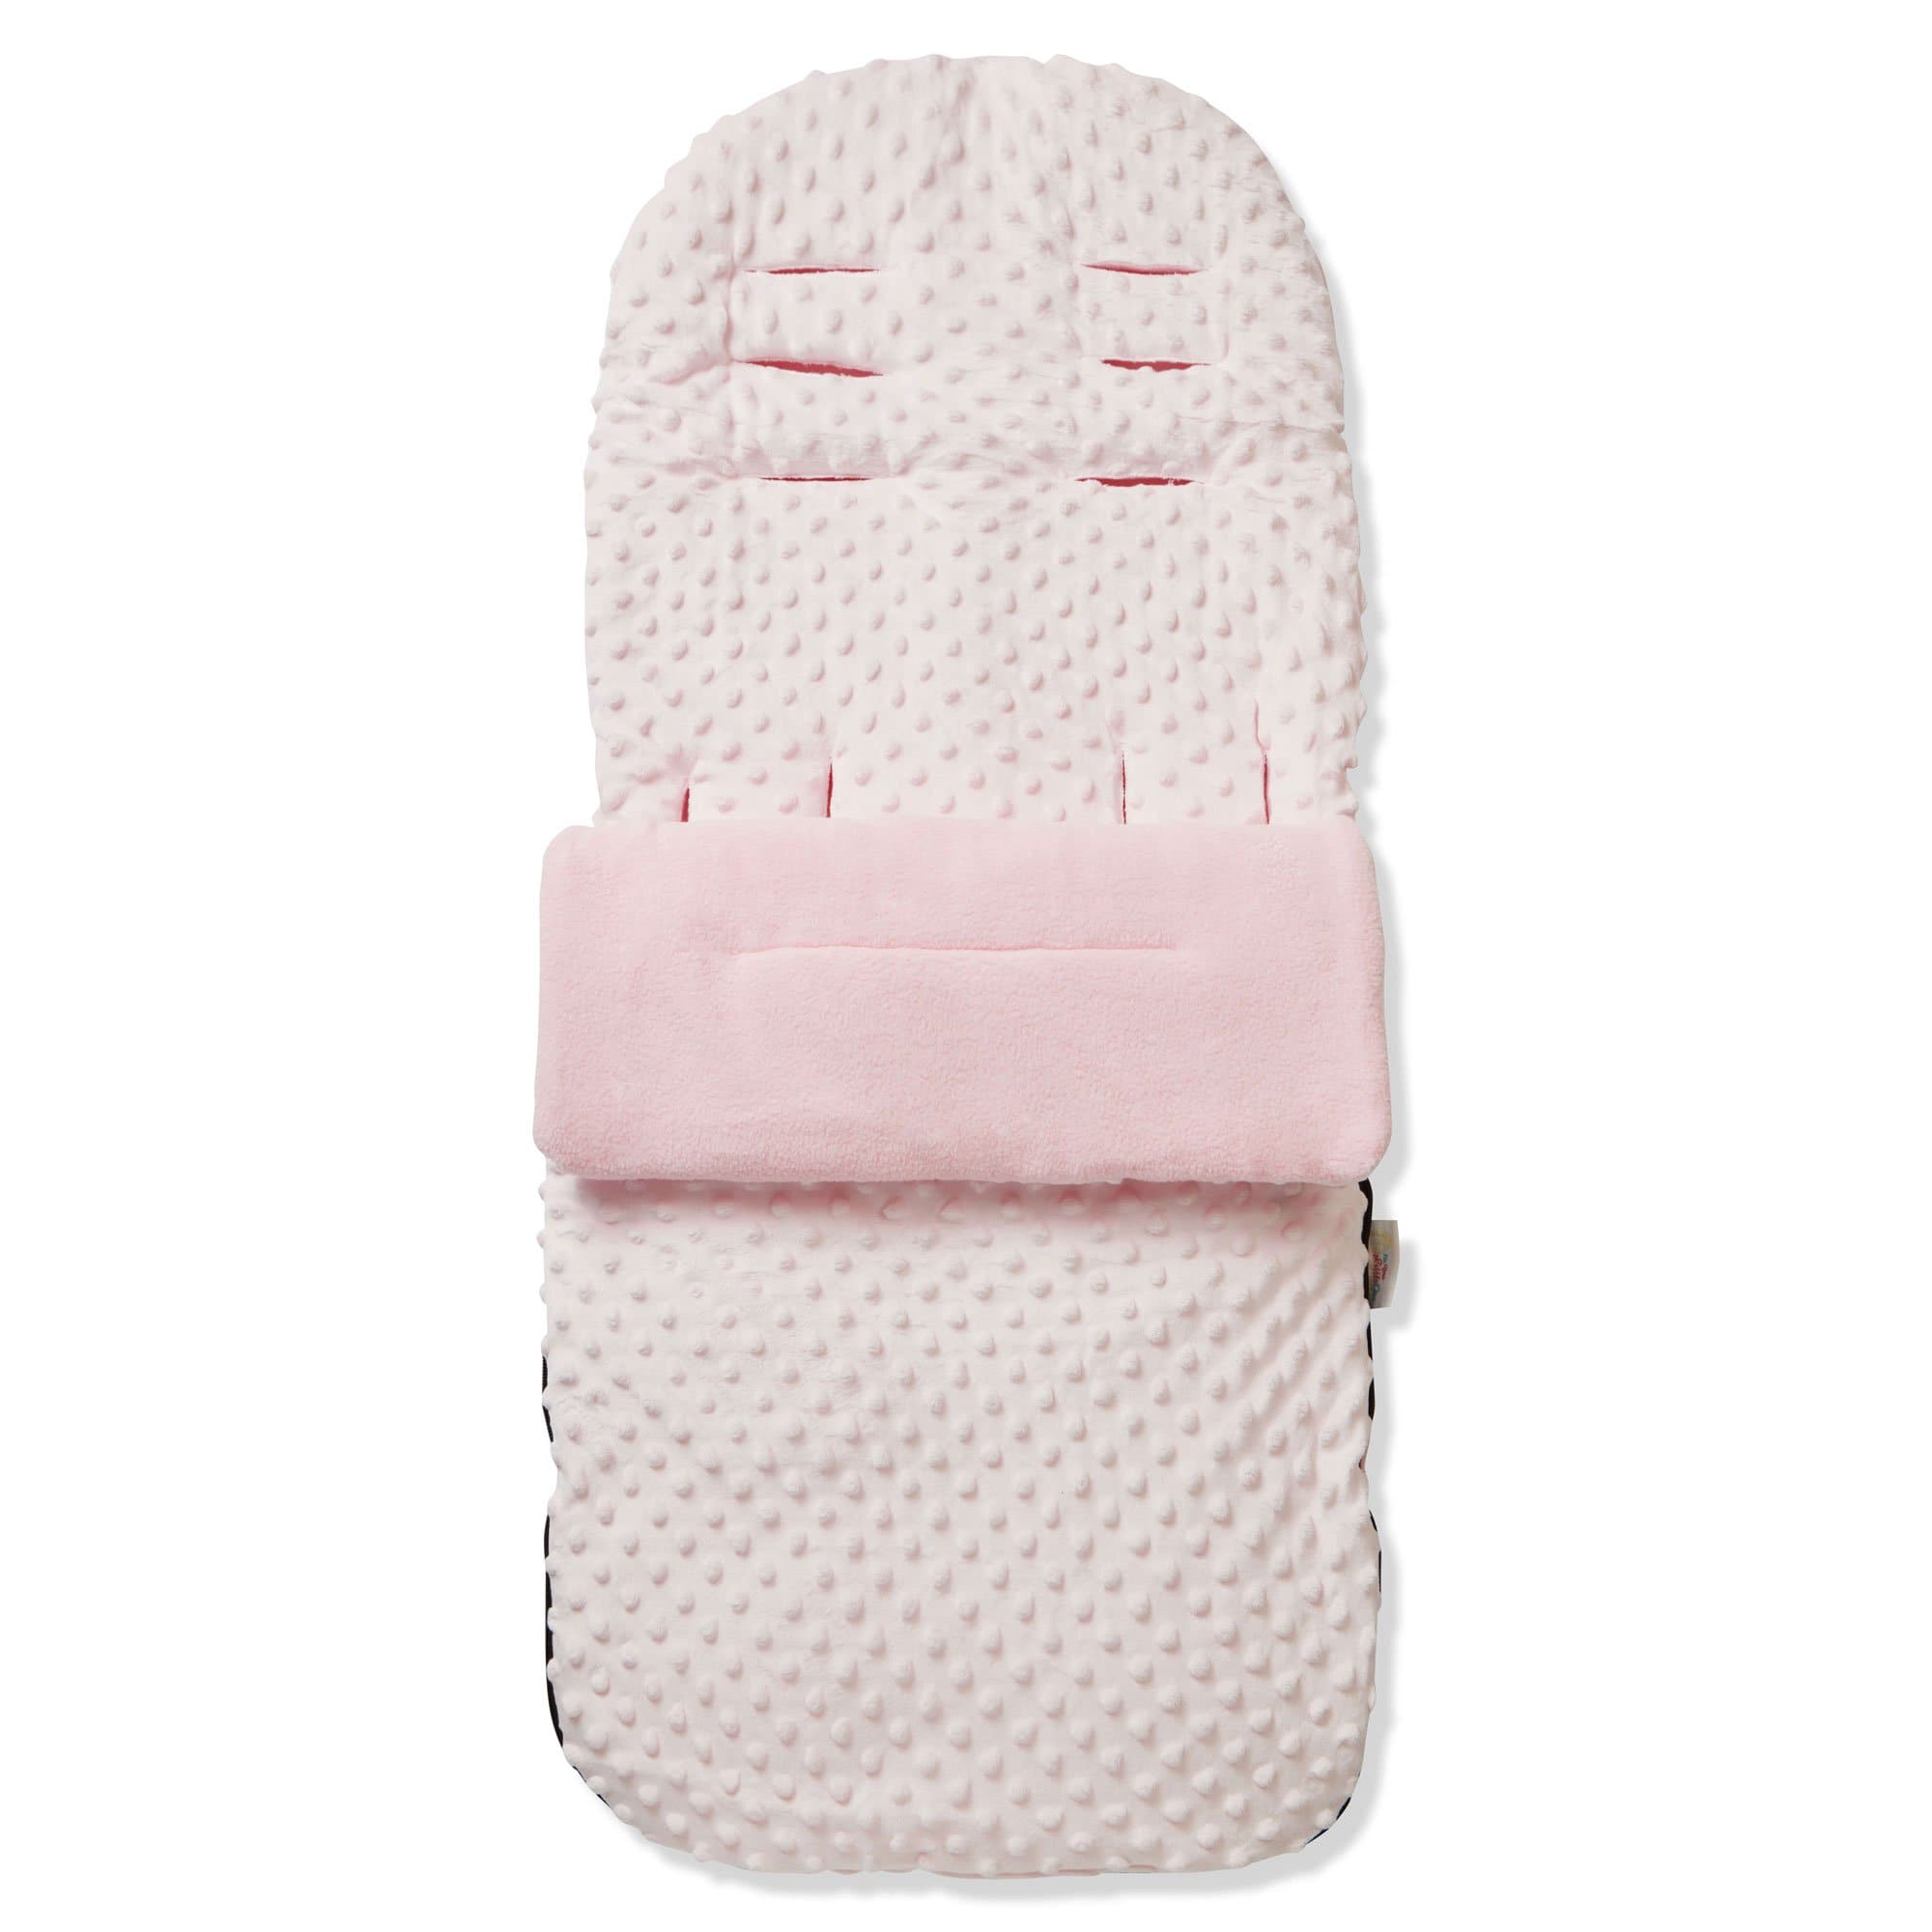 Dimple Footmuff / Cosy Toes Compatible with Firstwheels - Pink / Fits All Models | For Your Little One